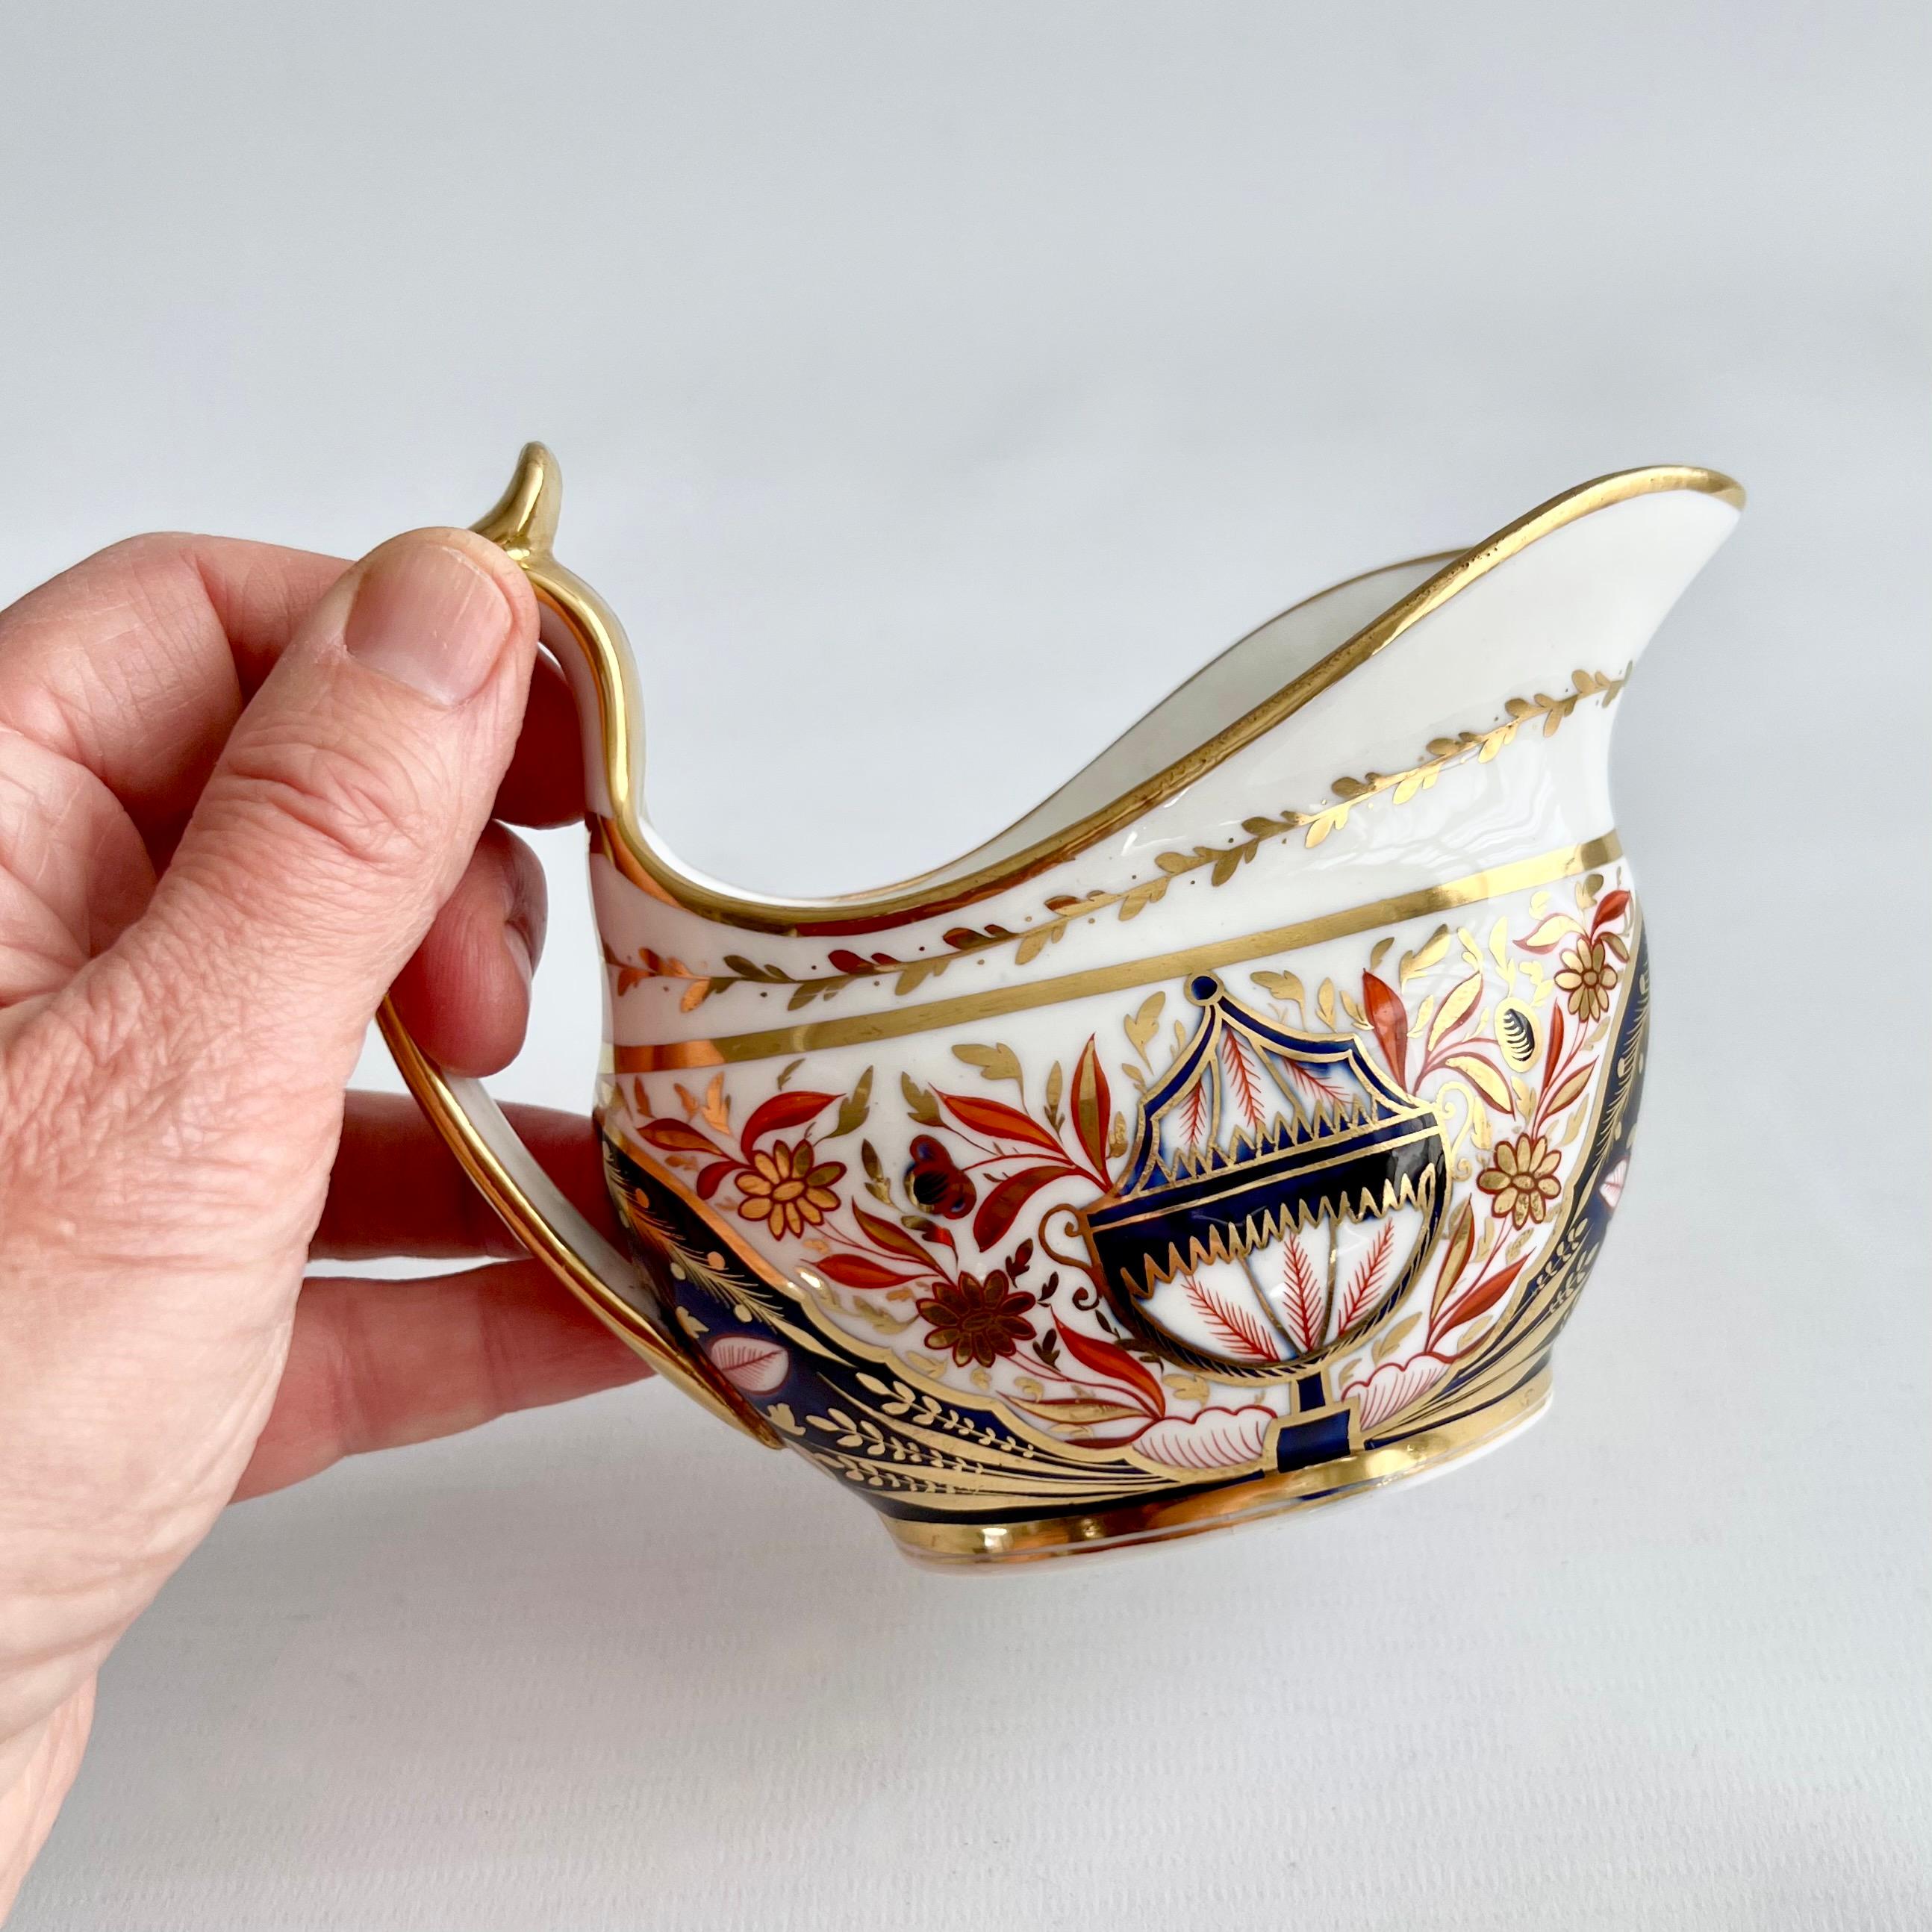 This is a beautiful and rare milk jug or creamer made by Minton in about 1810. The jug has a very beautiful neoclassical Imari pattern with the number 202.

Minton was one of the pioneers of English china production alongside other great potters